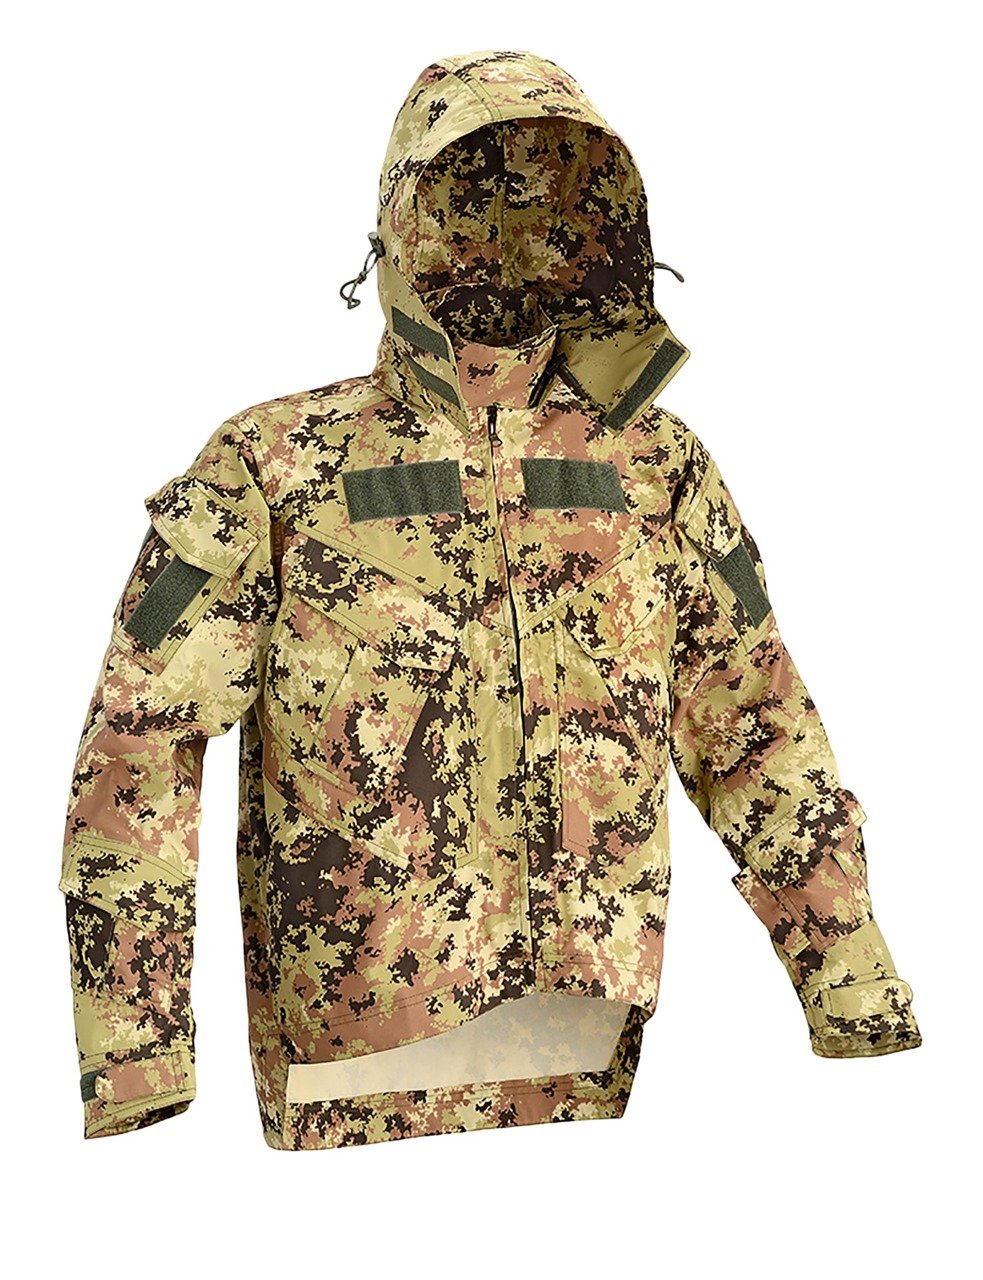 Army Navy Surplus Tactical Big variety  Cheap prices Military Surplus, Clothing, Law Enforcement, Boots, Outdoor   Tactical Gear